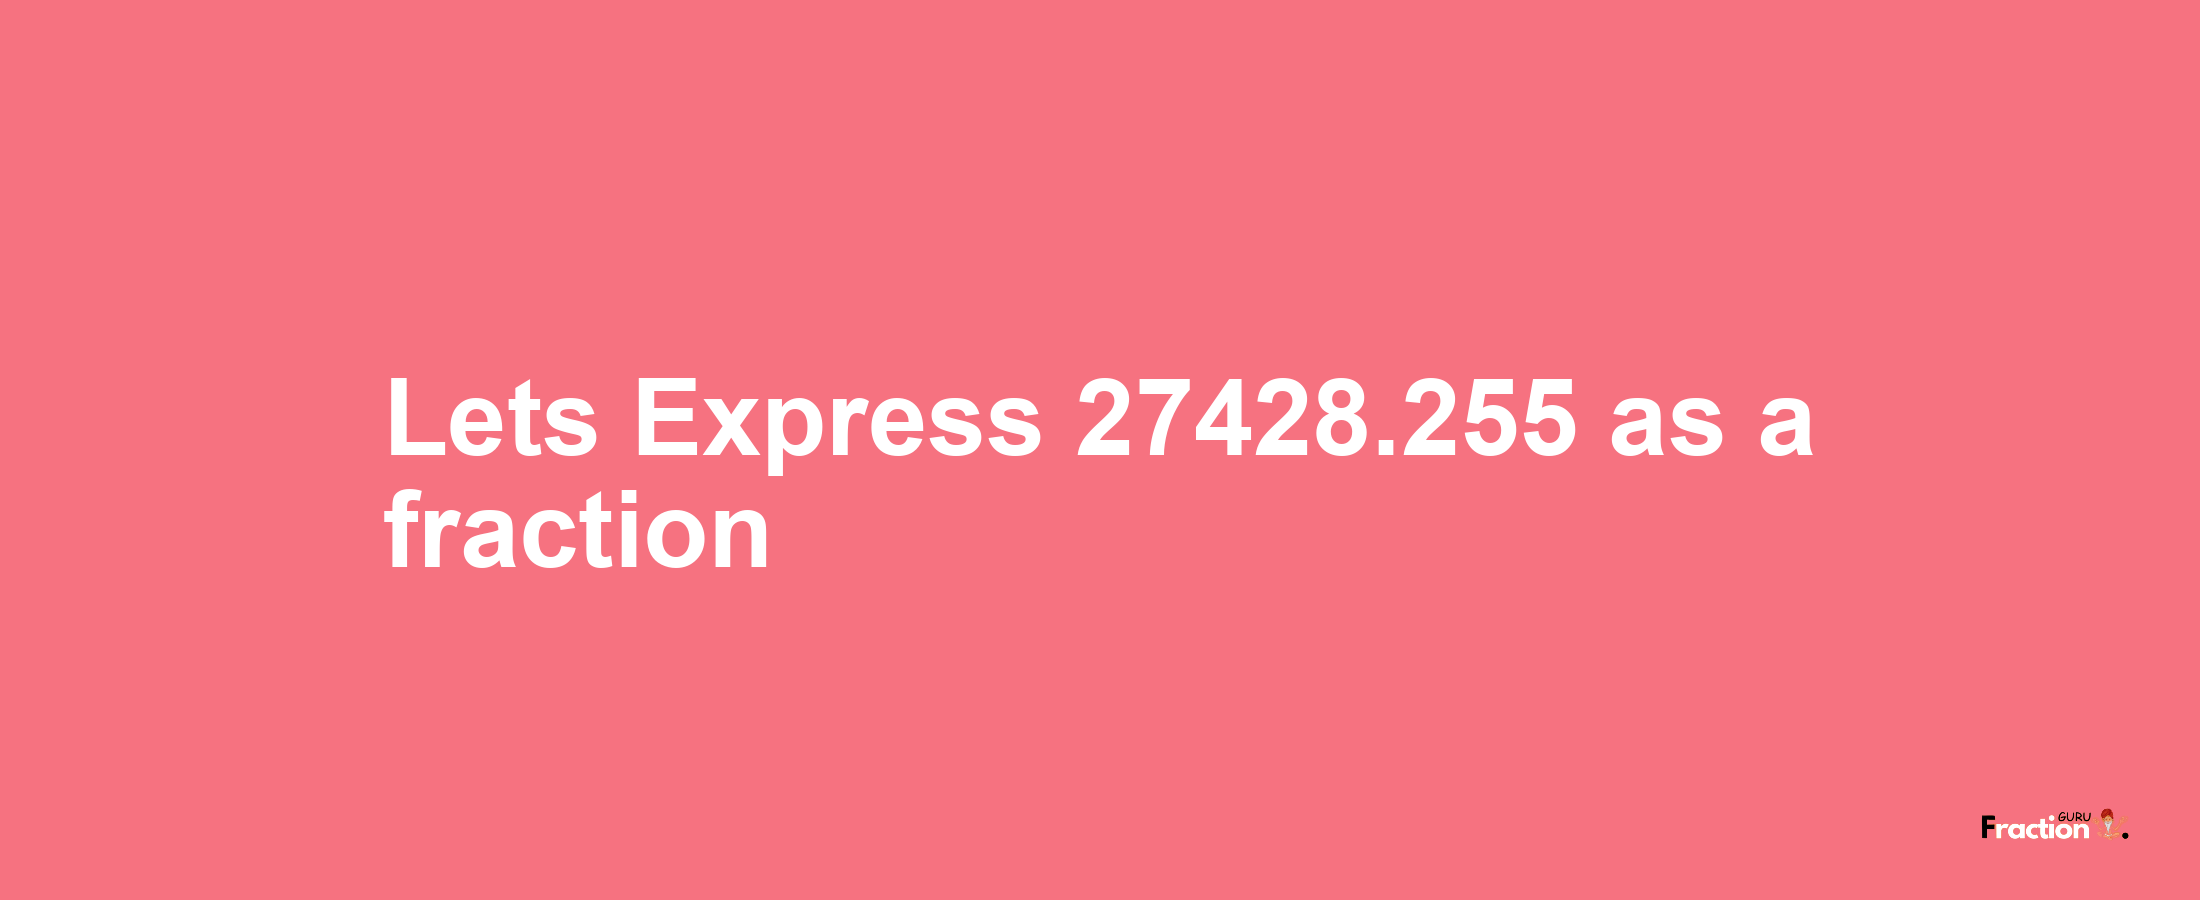 Lets Express 27428.255 as afraction